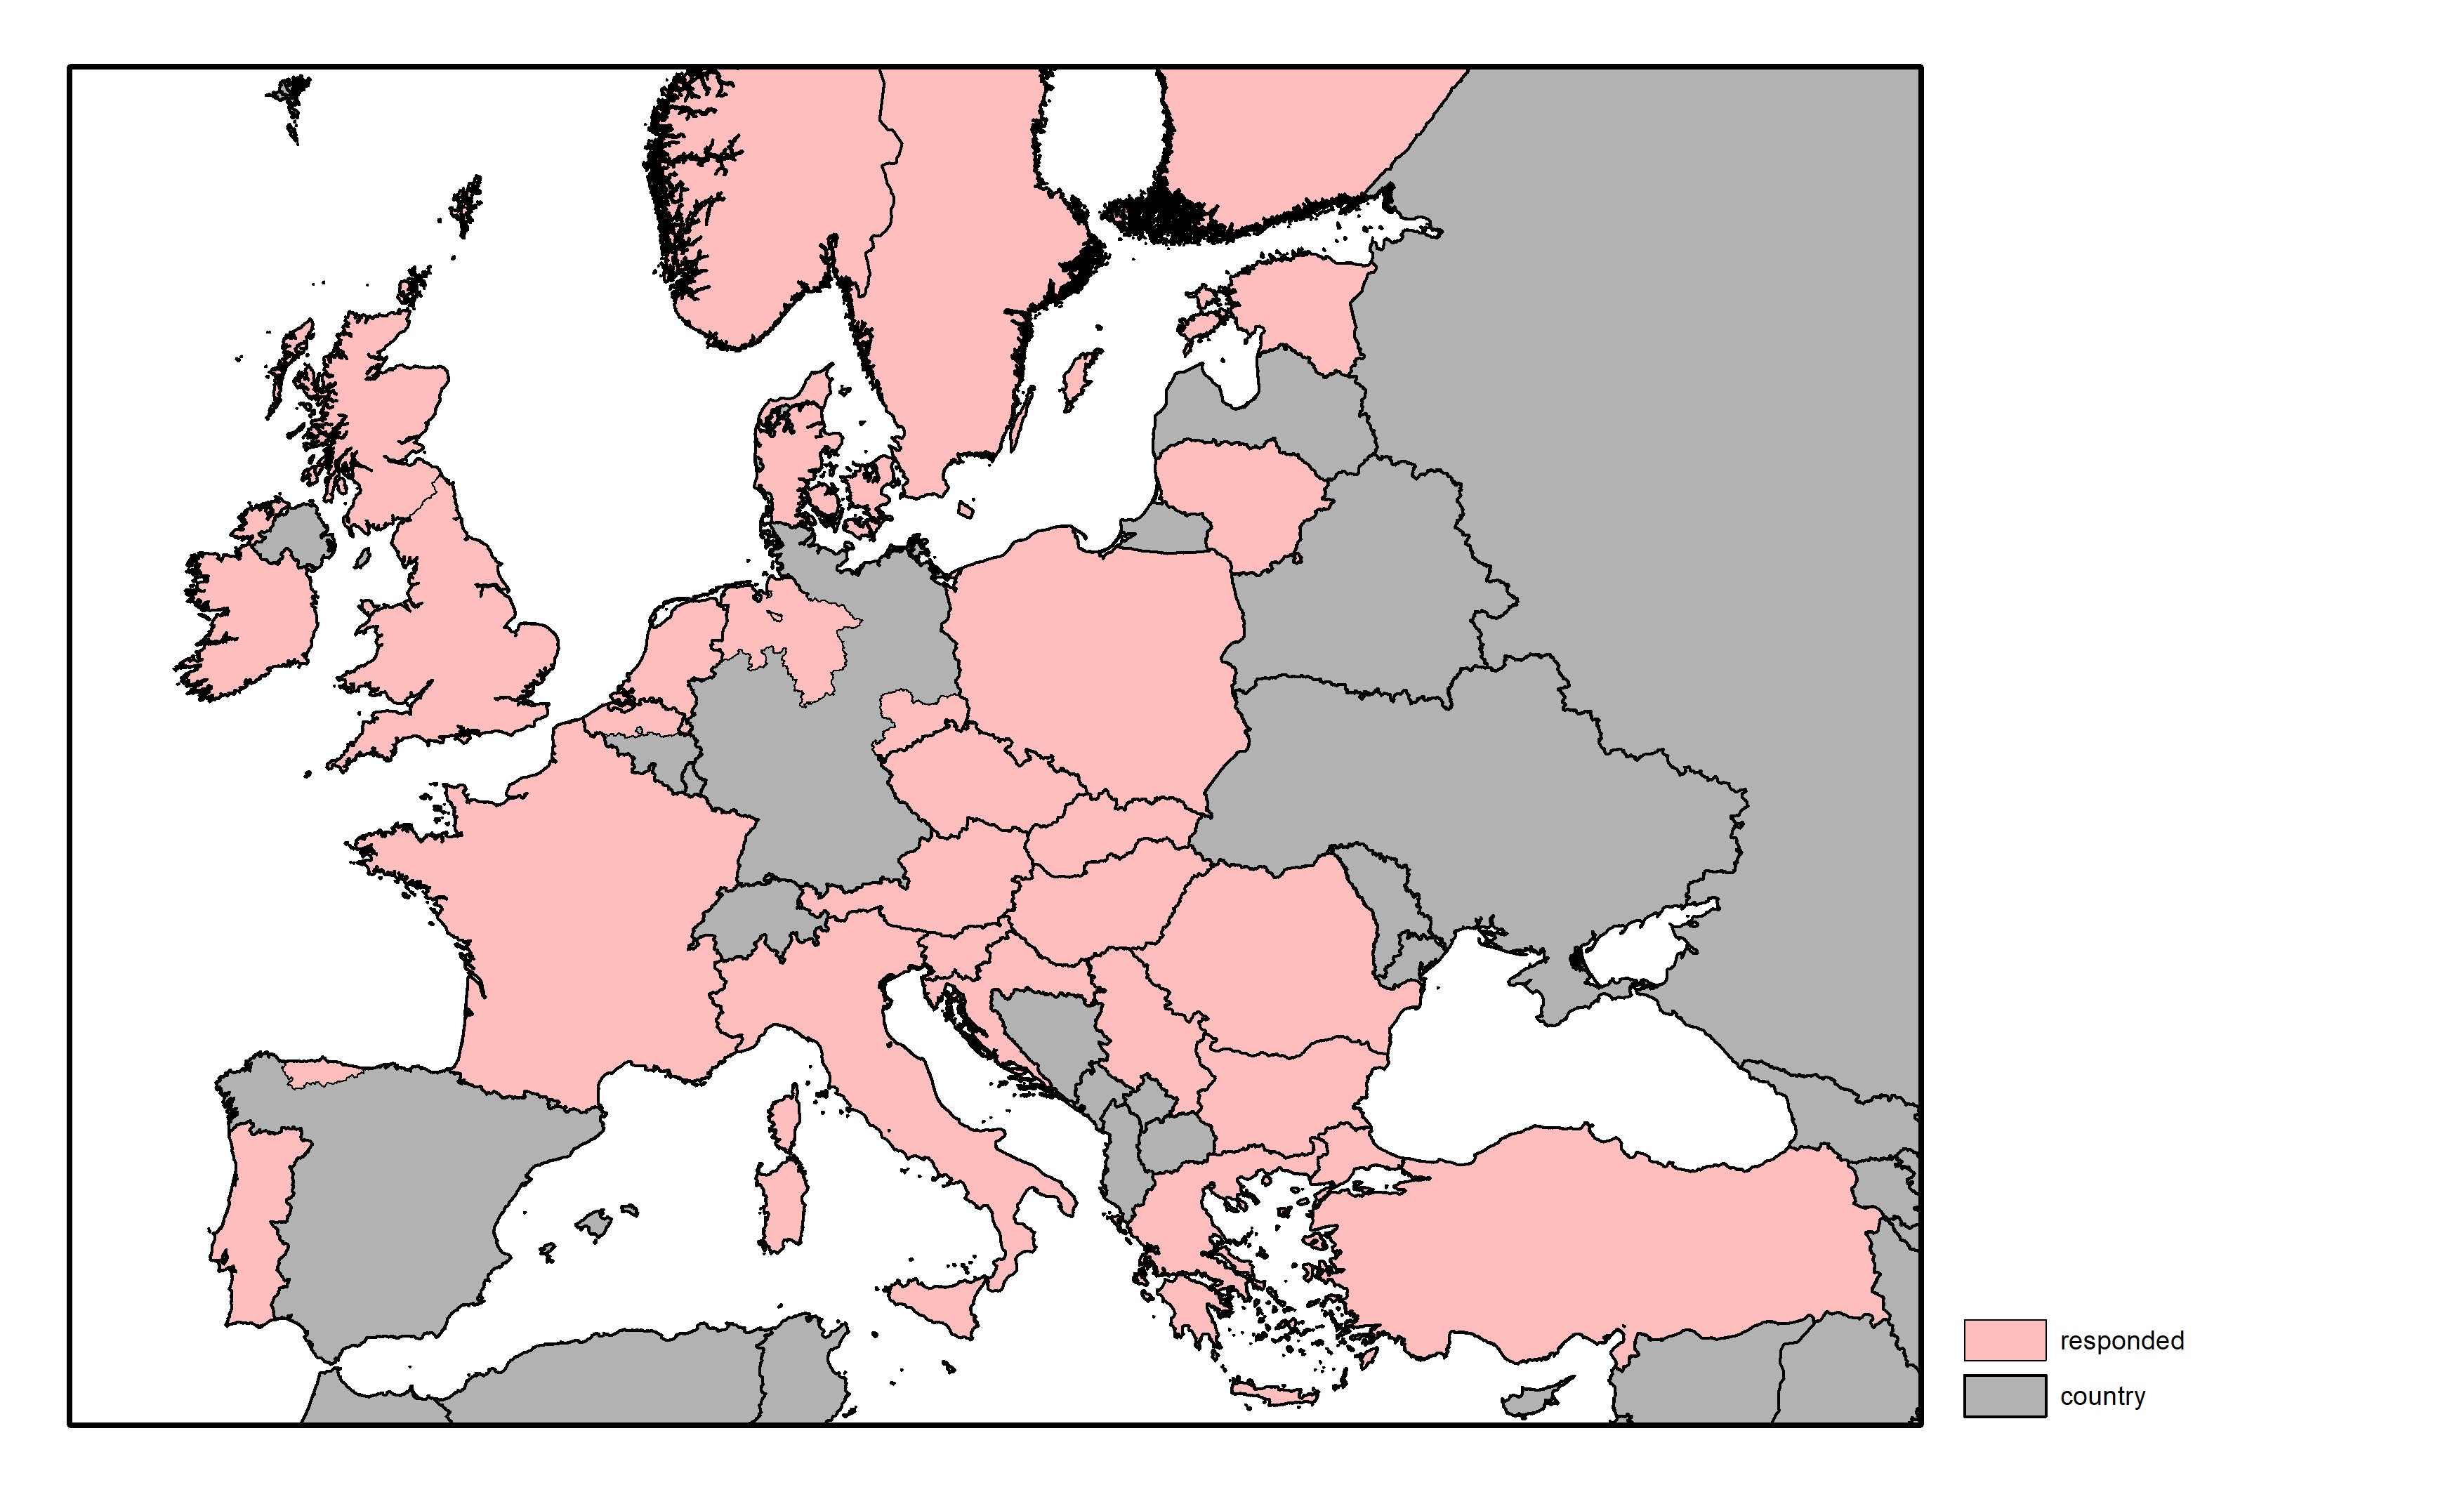 Figure 1: a map of Europe showing countries and regions in colour based on response rates to the survey question.